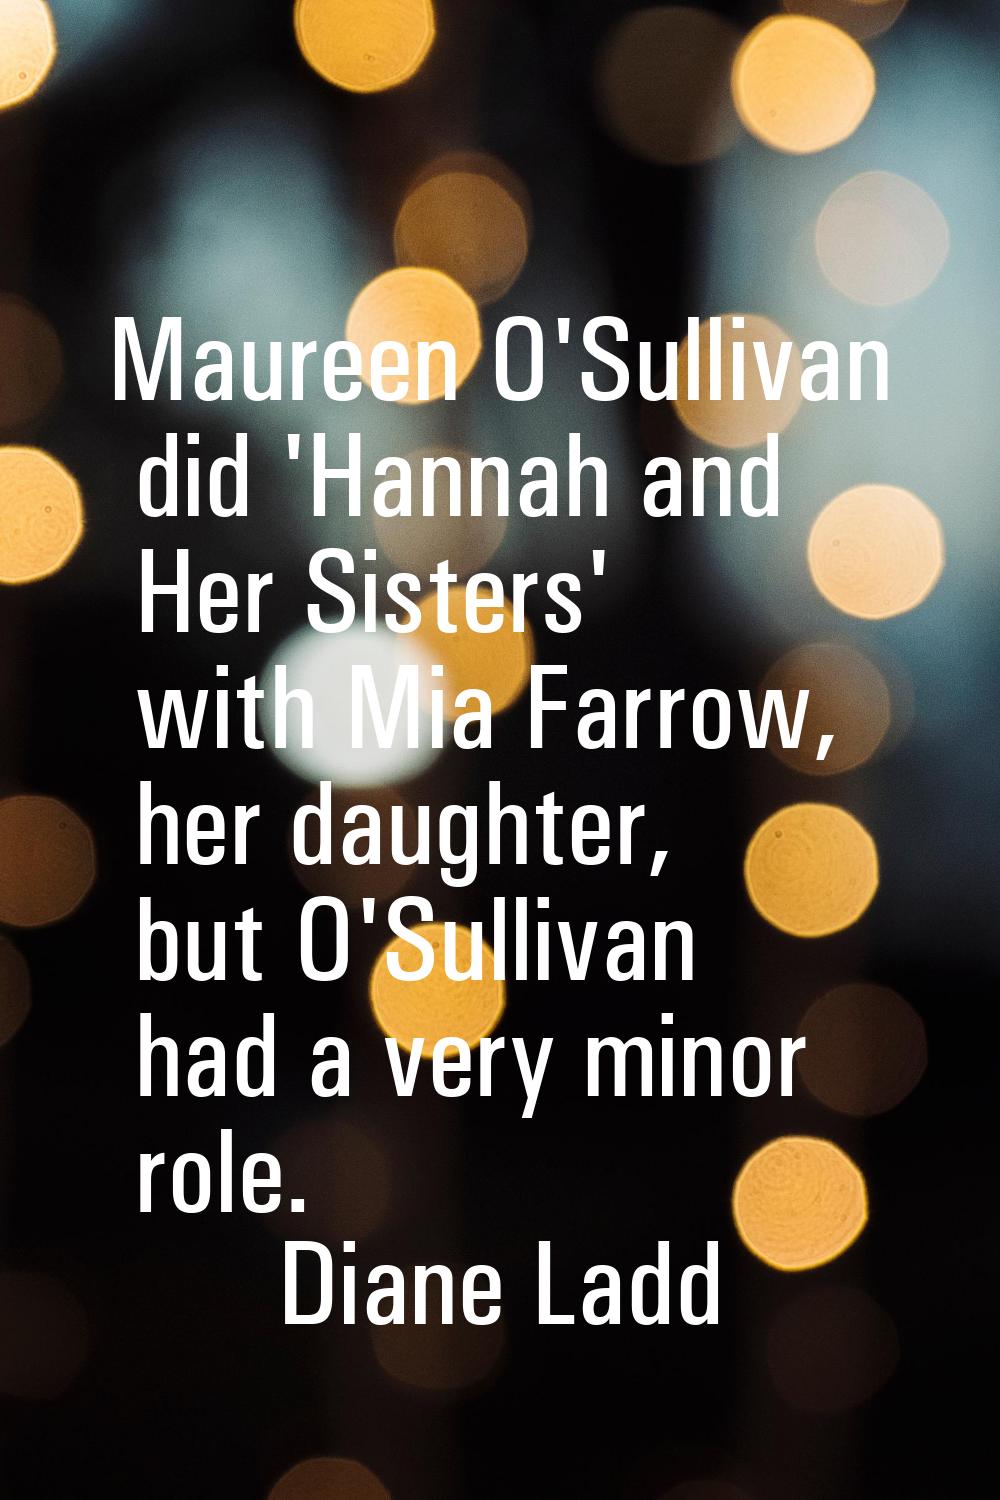 Maureen O'Sullivan did 'Hannah and Her Sisters' with Mia Farrow, her daughter, but O'Sullivan had a